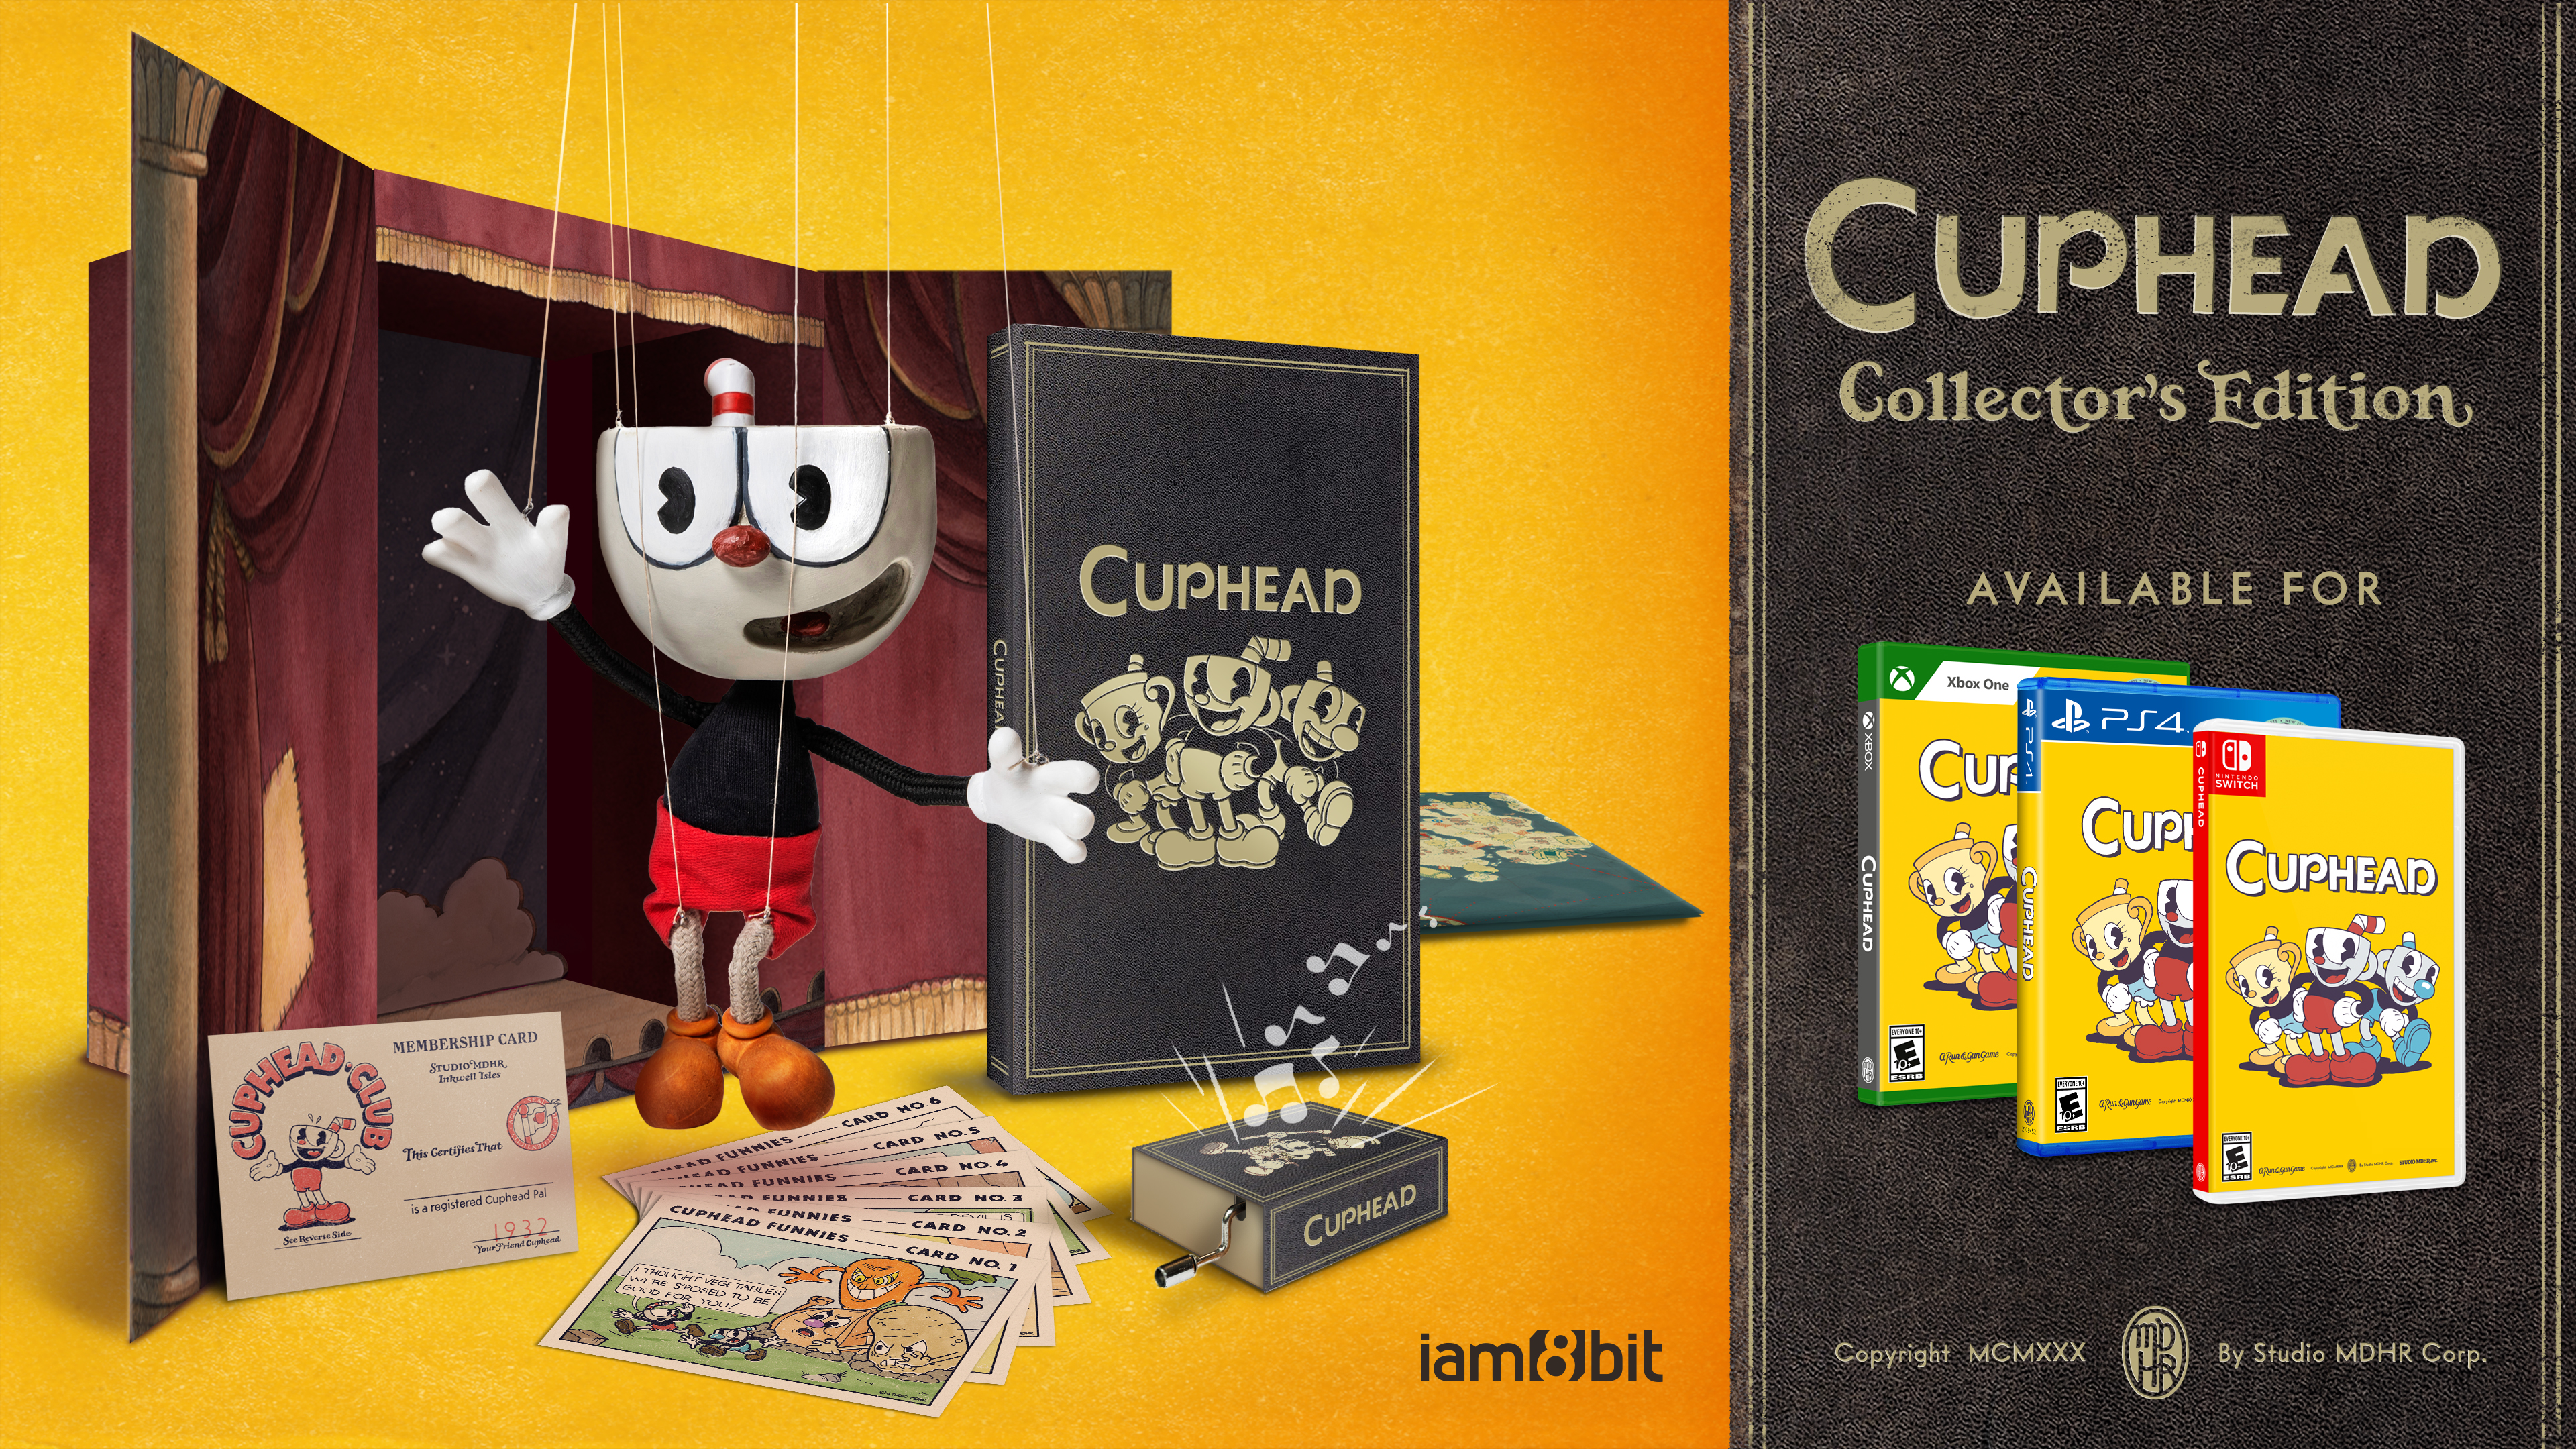 Cuphead physical edition launches December 6 - Gematsu